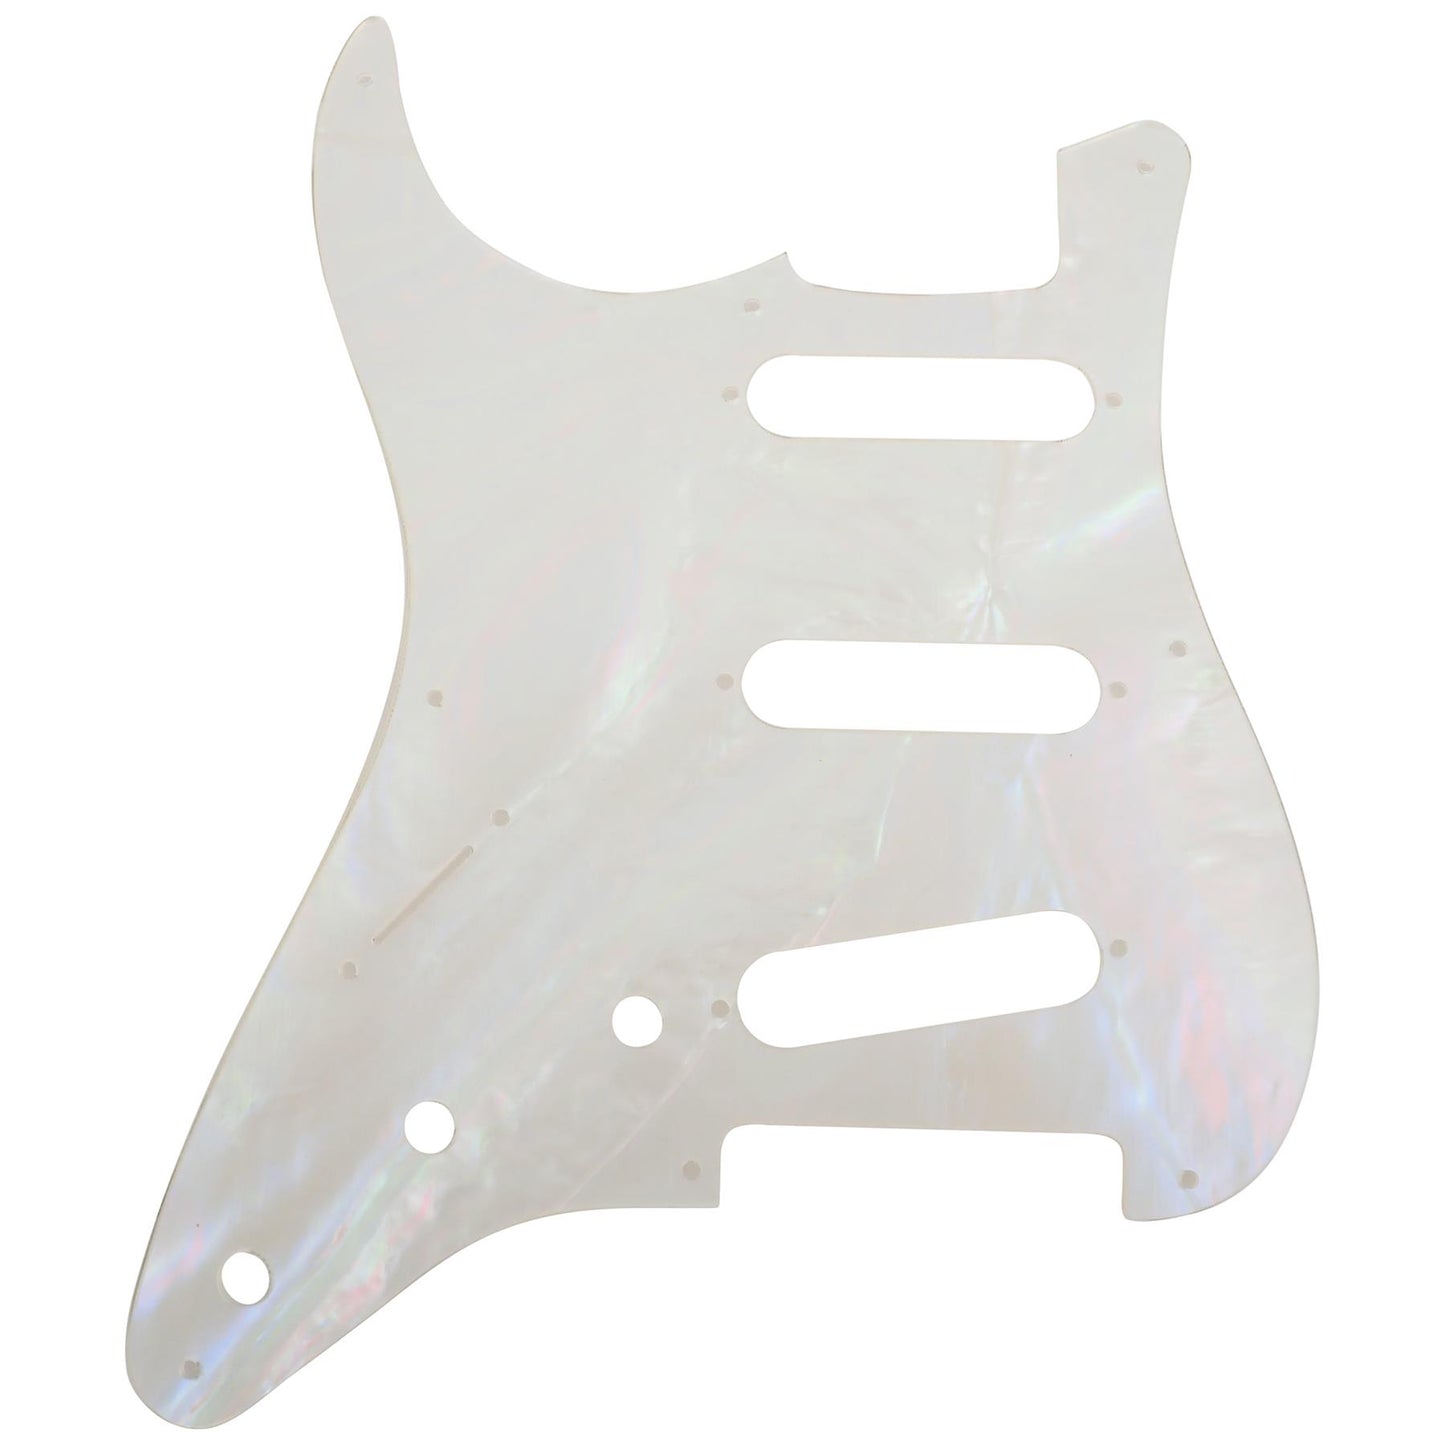 Luthitec Mother of Pearl Effect Celluloid Laminate Acrylic Stratocaster 8 Hole Guitar Pickguard